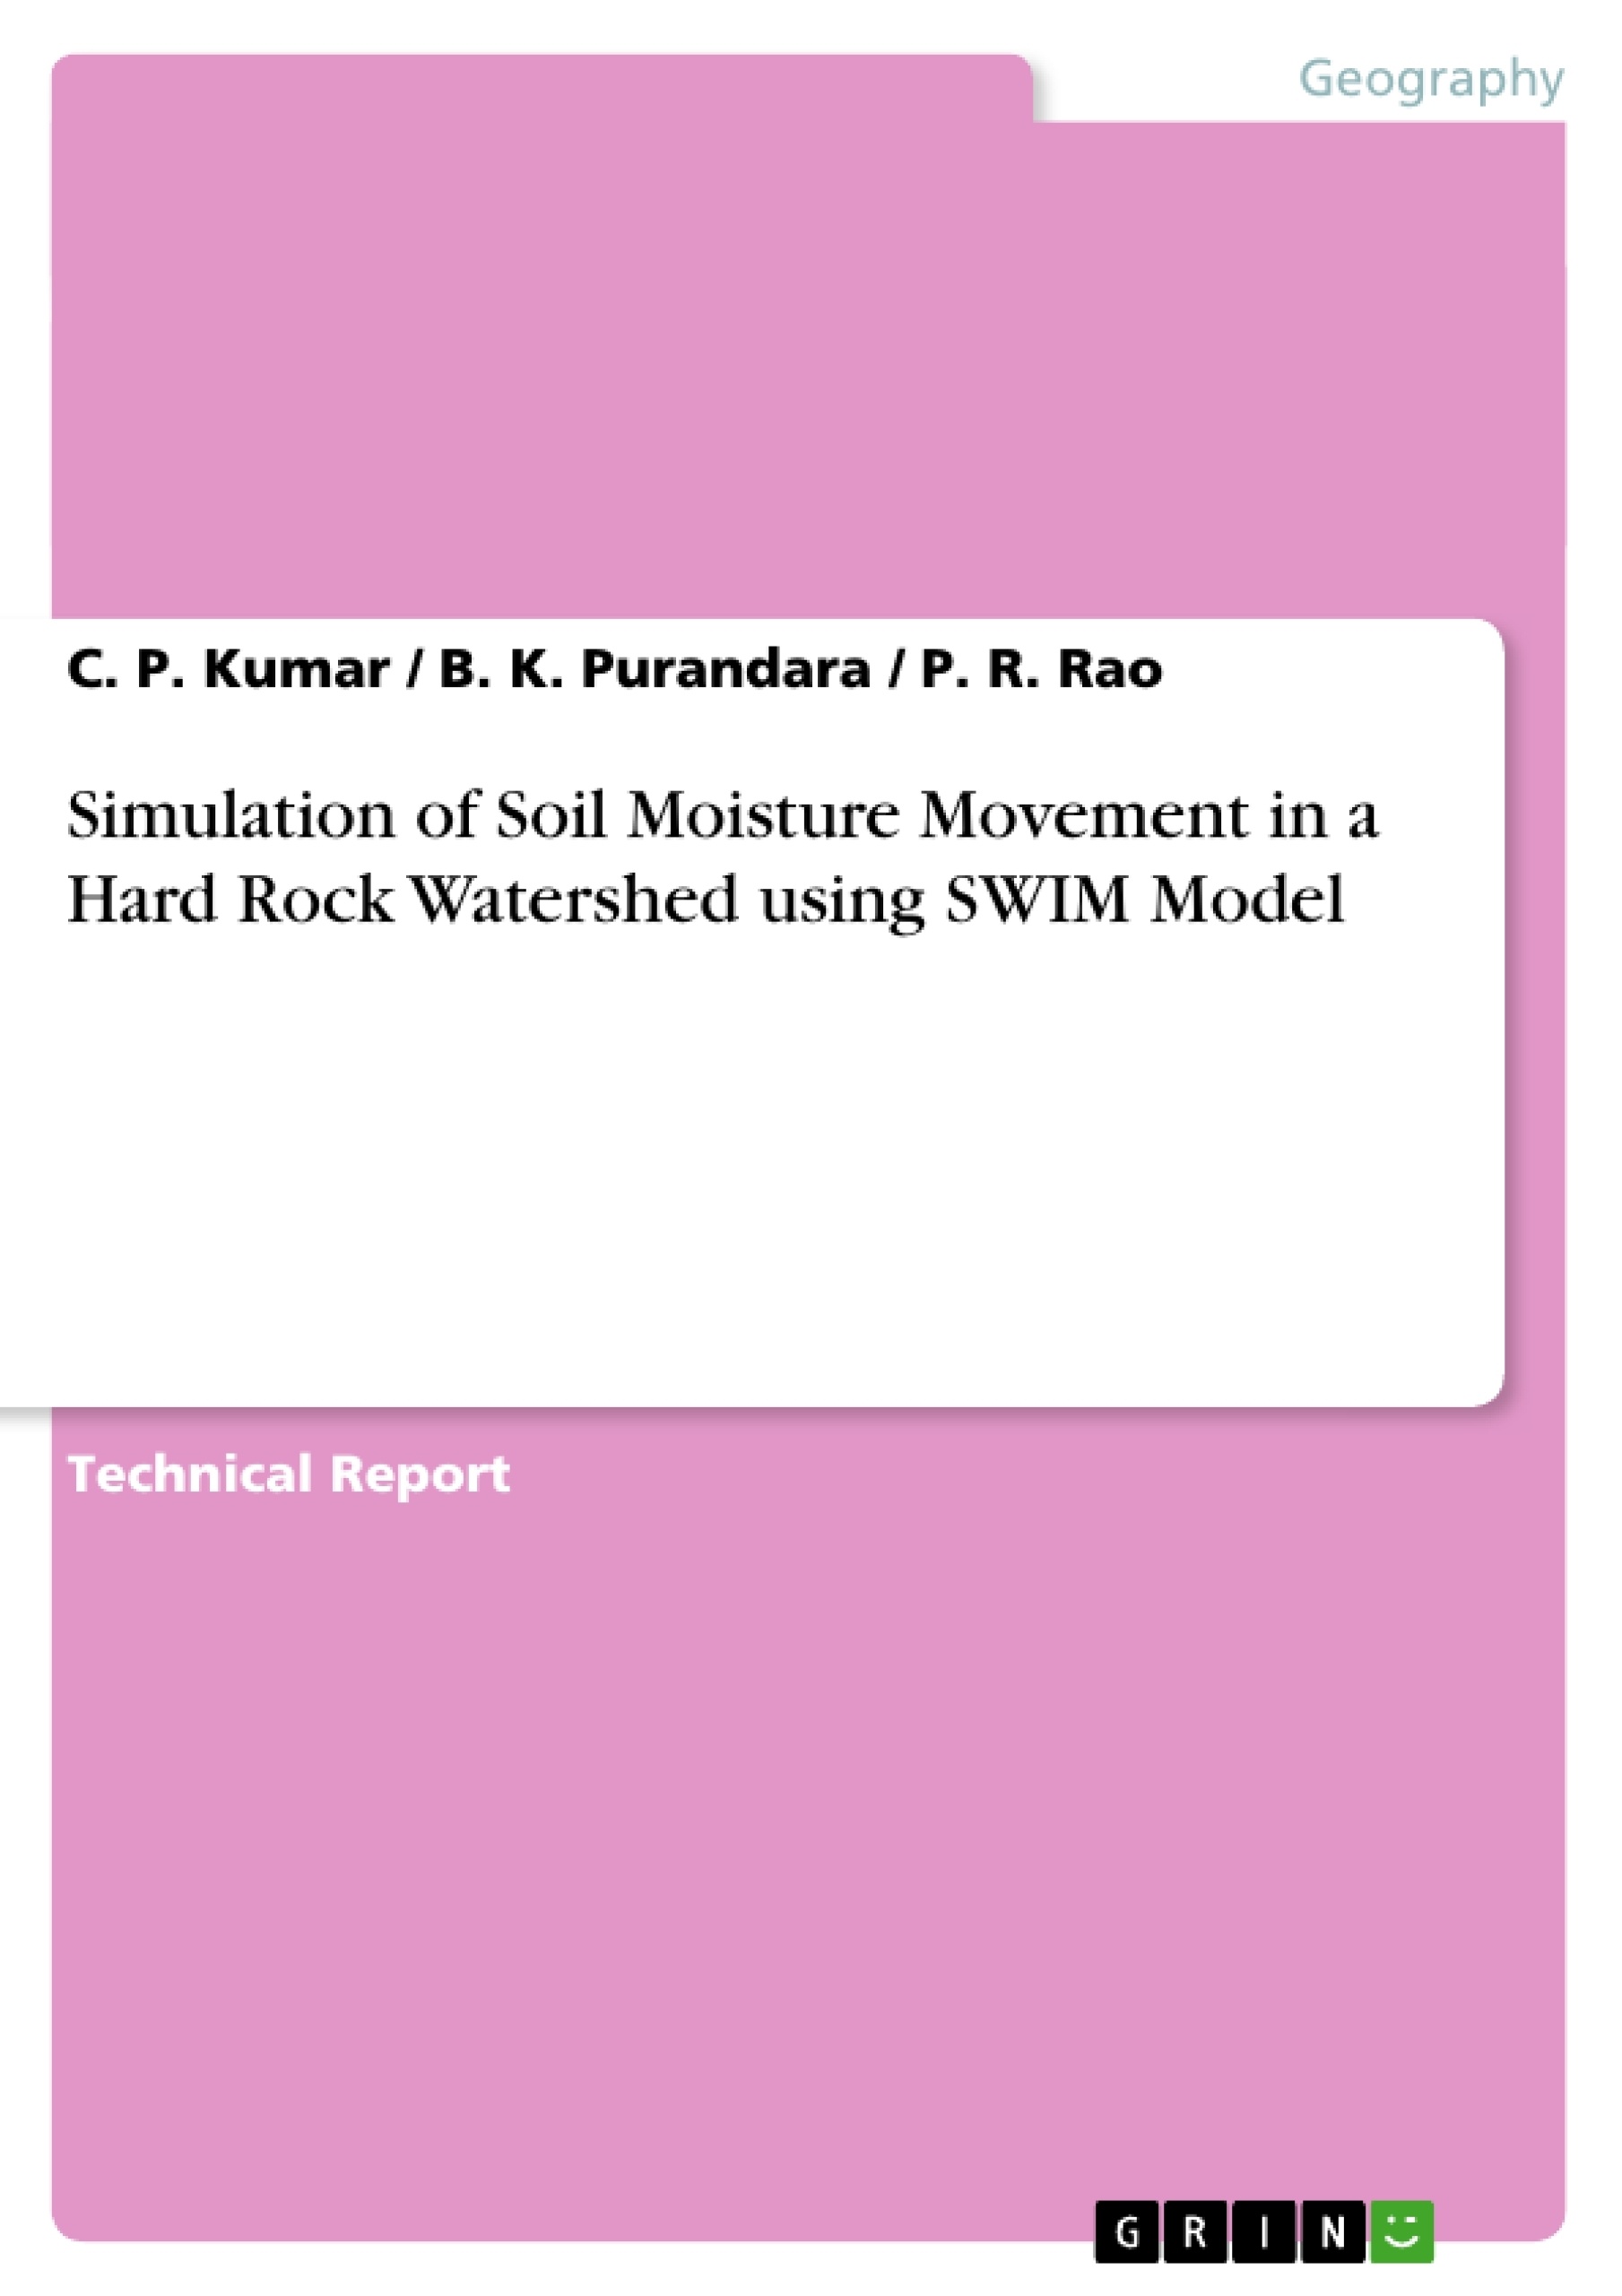 Title: Simulation of Soil Moisture Movement in a Hard Rock Watershed using SWIM Model